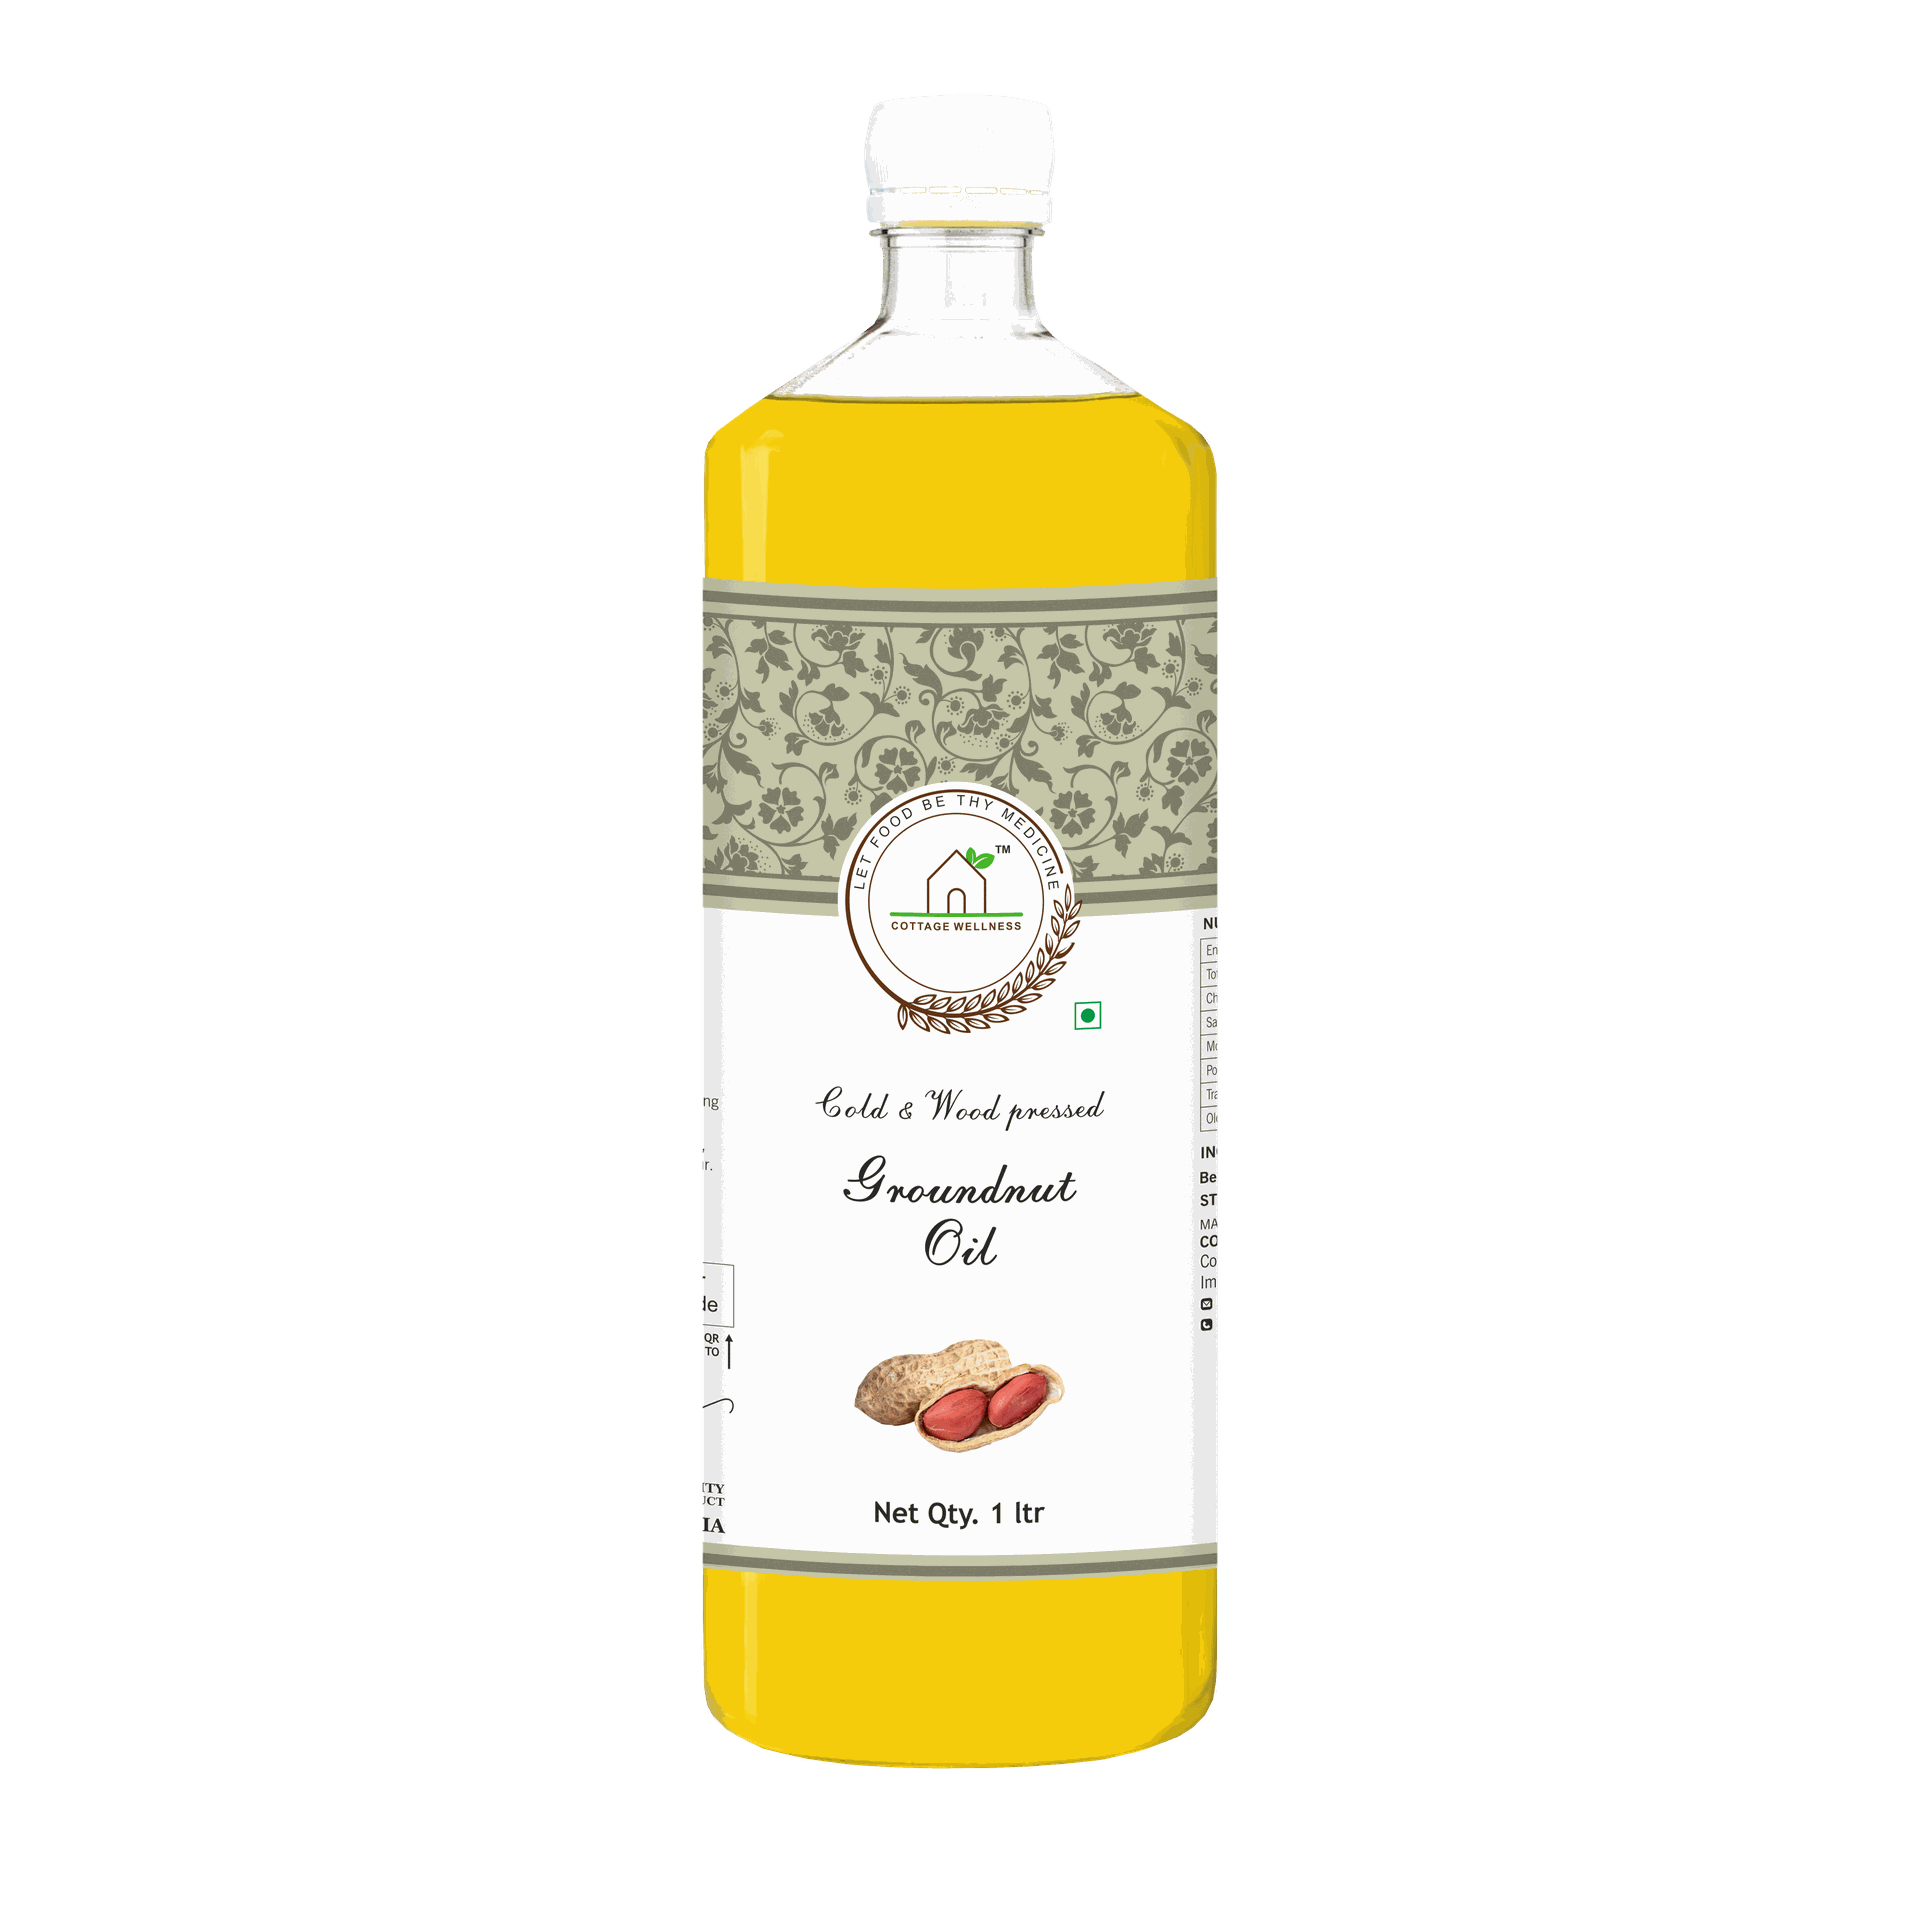 Cottage Wellness Groundnut Oil Cold and Wood Pressed Edible 1Litre - hfnl!fe